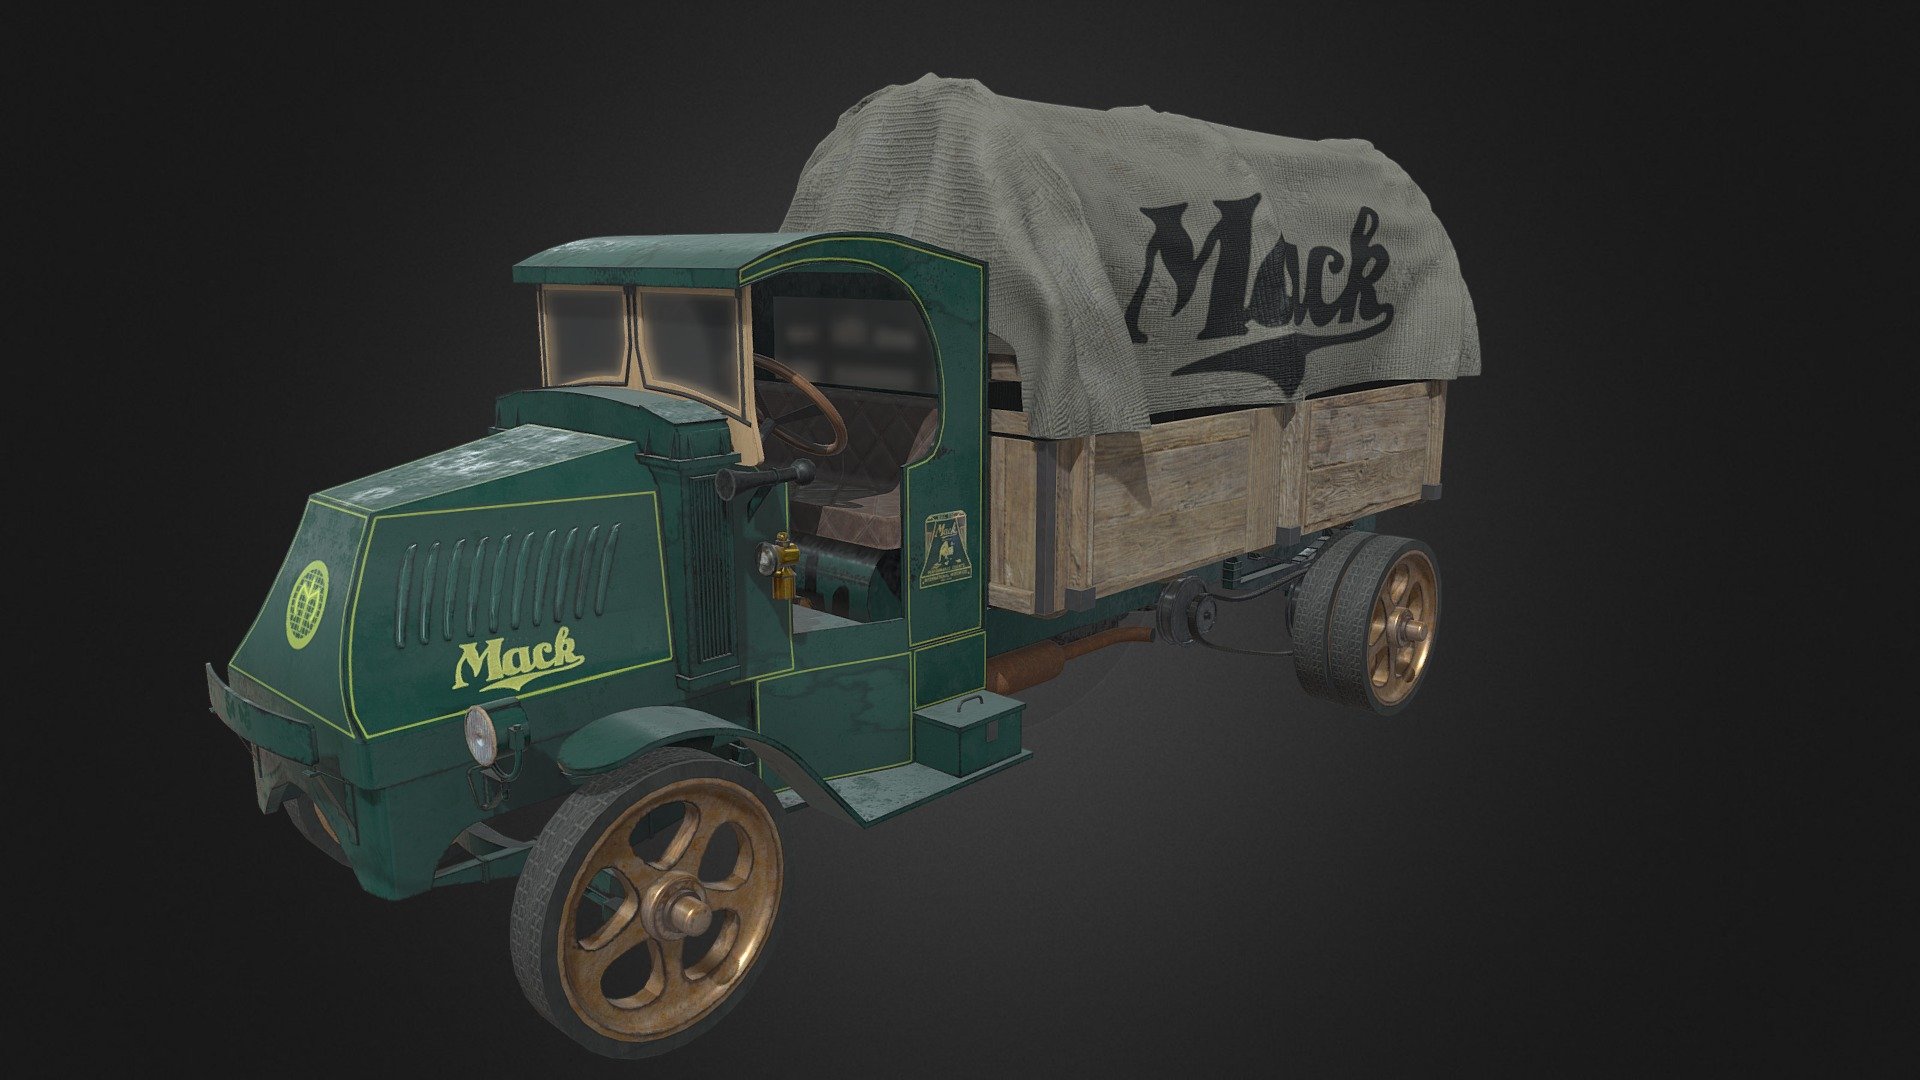 Model of a Mack AC truck fitted with wooden bed and textile canopy.  Truck itself is a relatively low poly mode, only canopy has a lot of detail. PBR setup includes diffuse, metallic, roughness and normal maps. Additional files include all of the textures in higher resolution (1K, 2K and 4K) 3d model